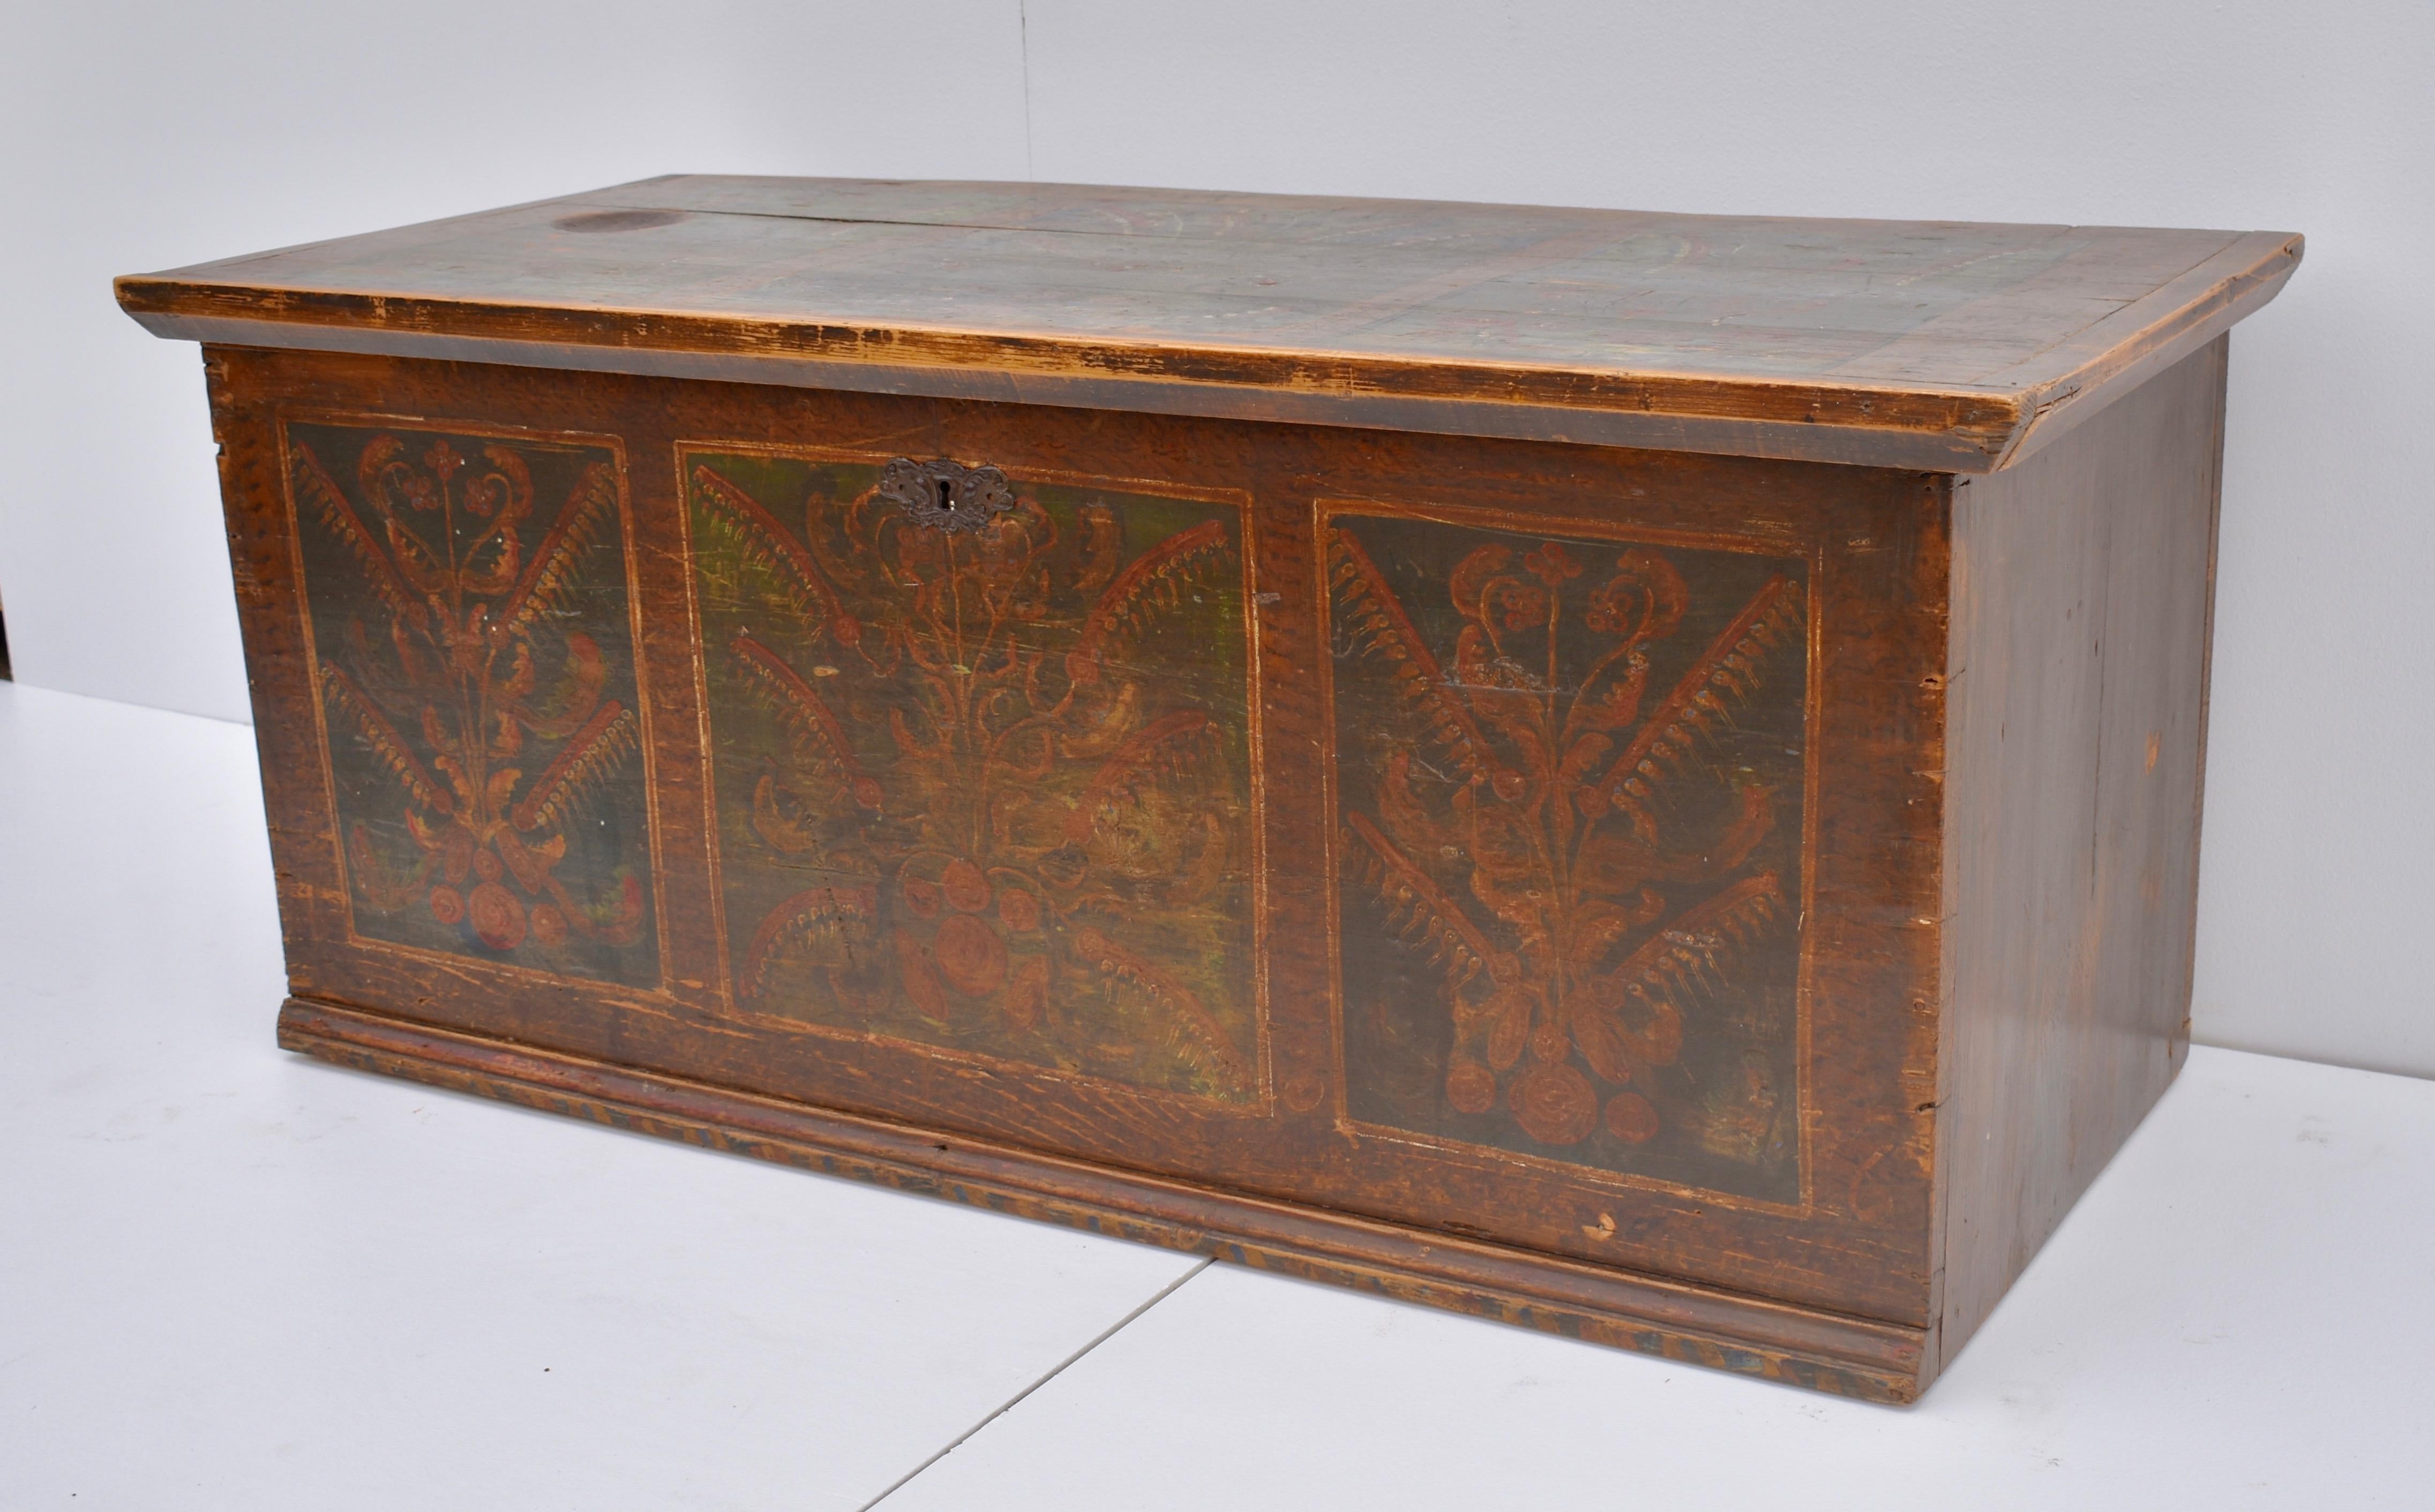 Hand-Painted Pine Blanket Chest in Original Decorative Paint